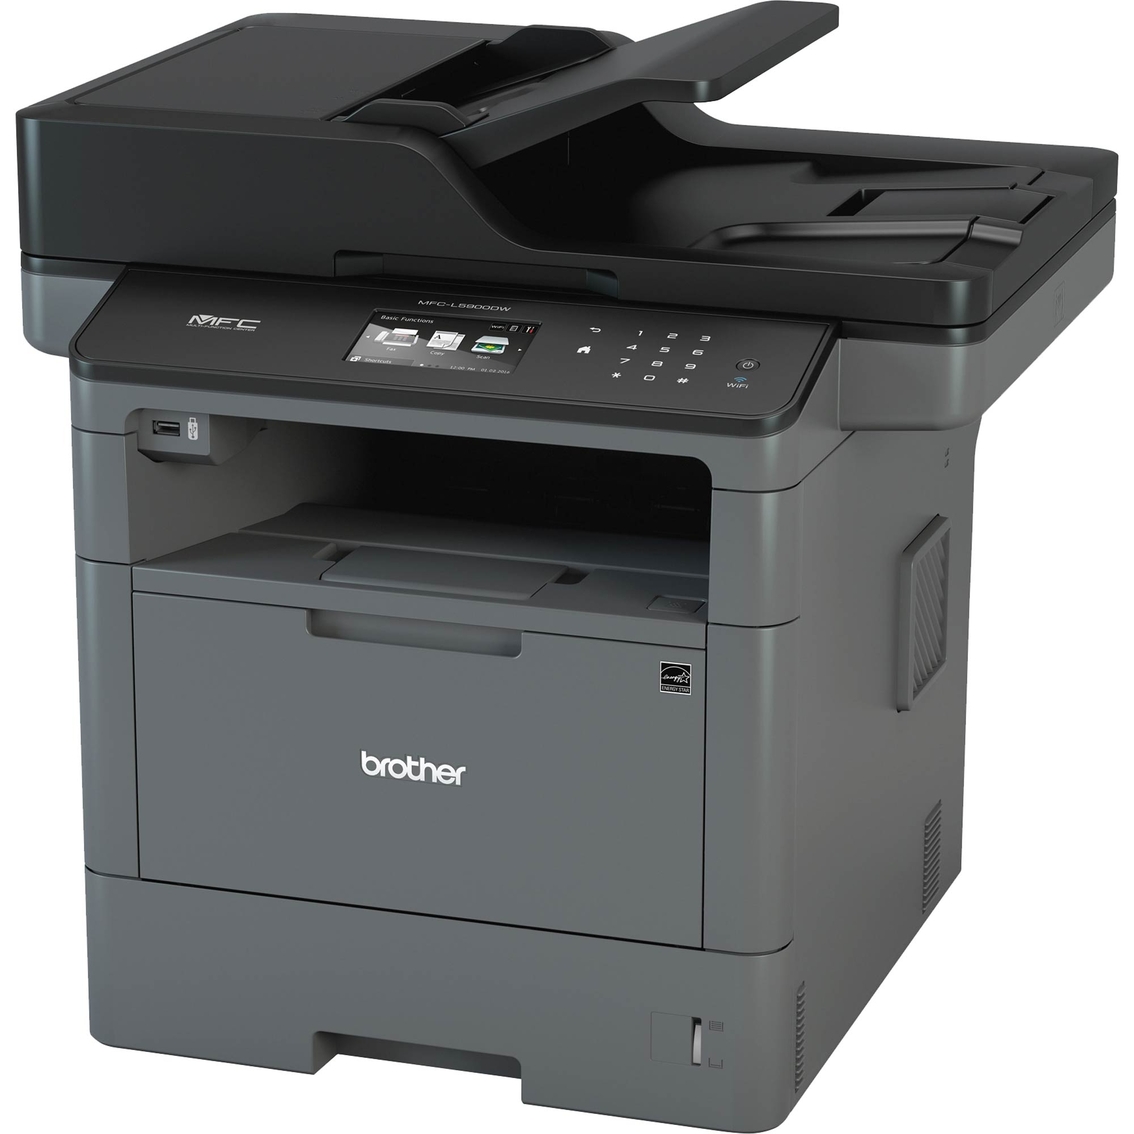 Brother MFC-L5900DW All-in-One Laser Printer - Image 3 of 5